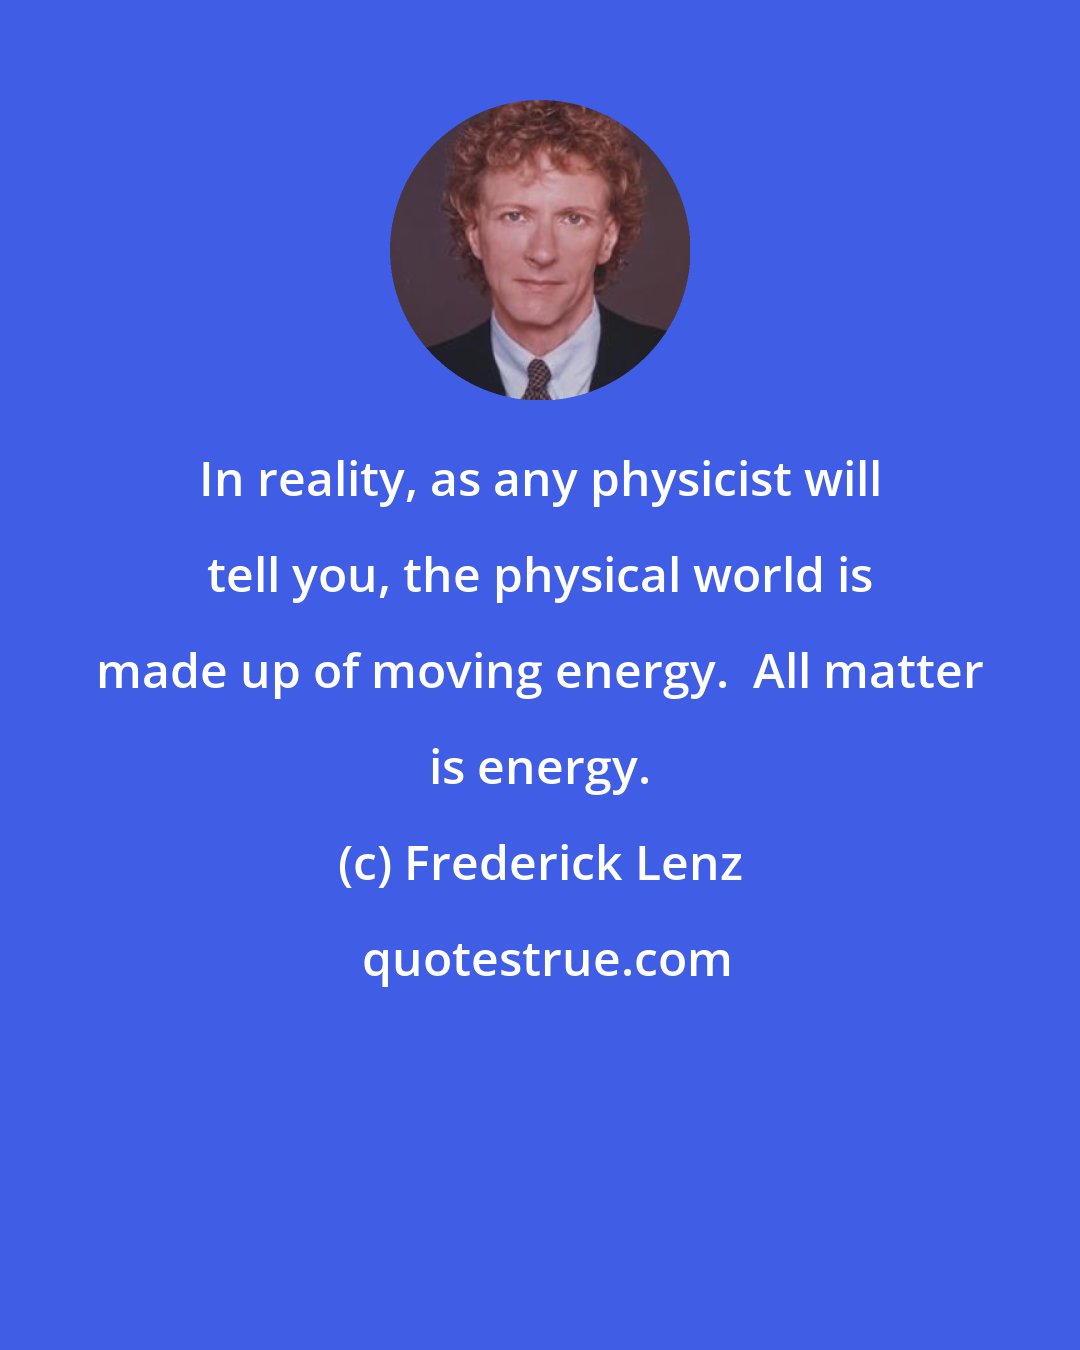 Frederick Lenz: In reality, as any physicist will tell you, the physical world is made up of moving energy.  All matter is energy.